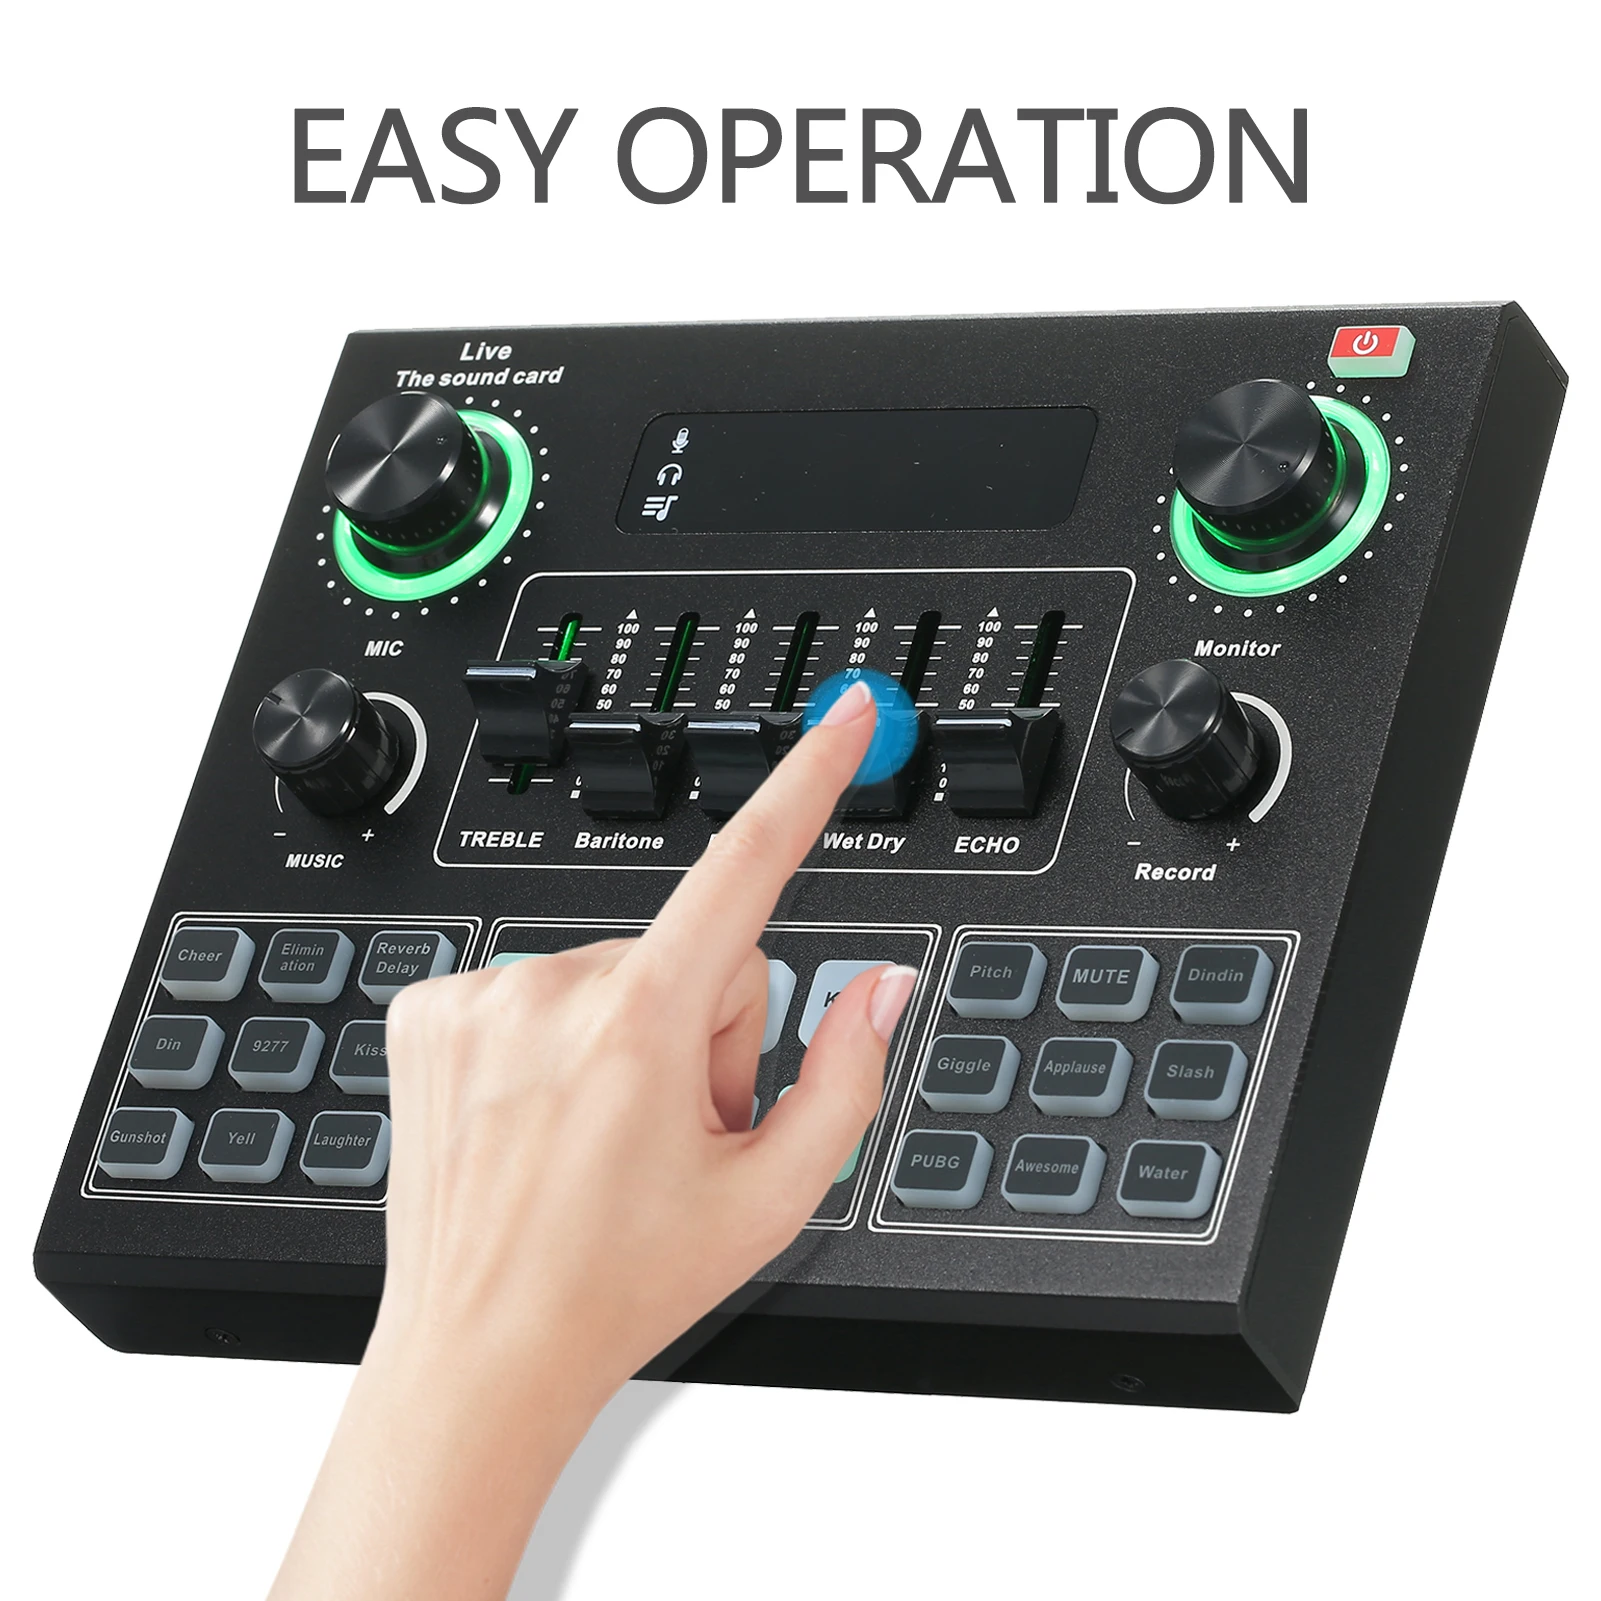 

V9 Live Sound Card BT Accompaniment Audio Mixer with Sound Effects Broadcasting Recording Network Singing on Phones Laptop